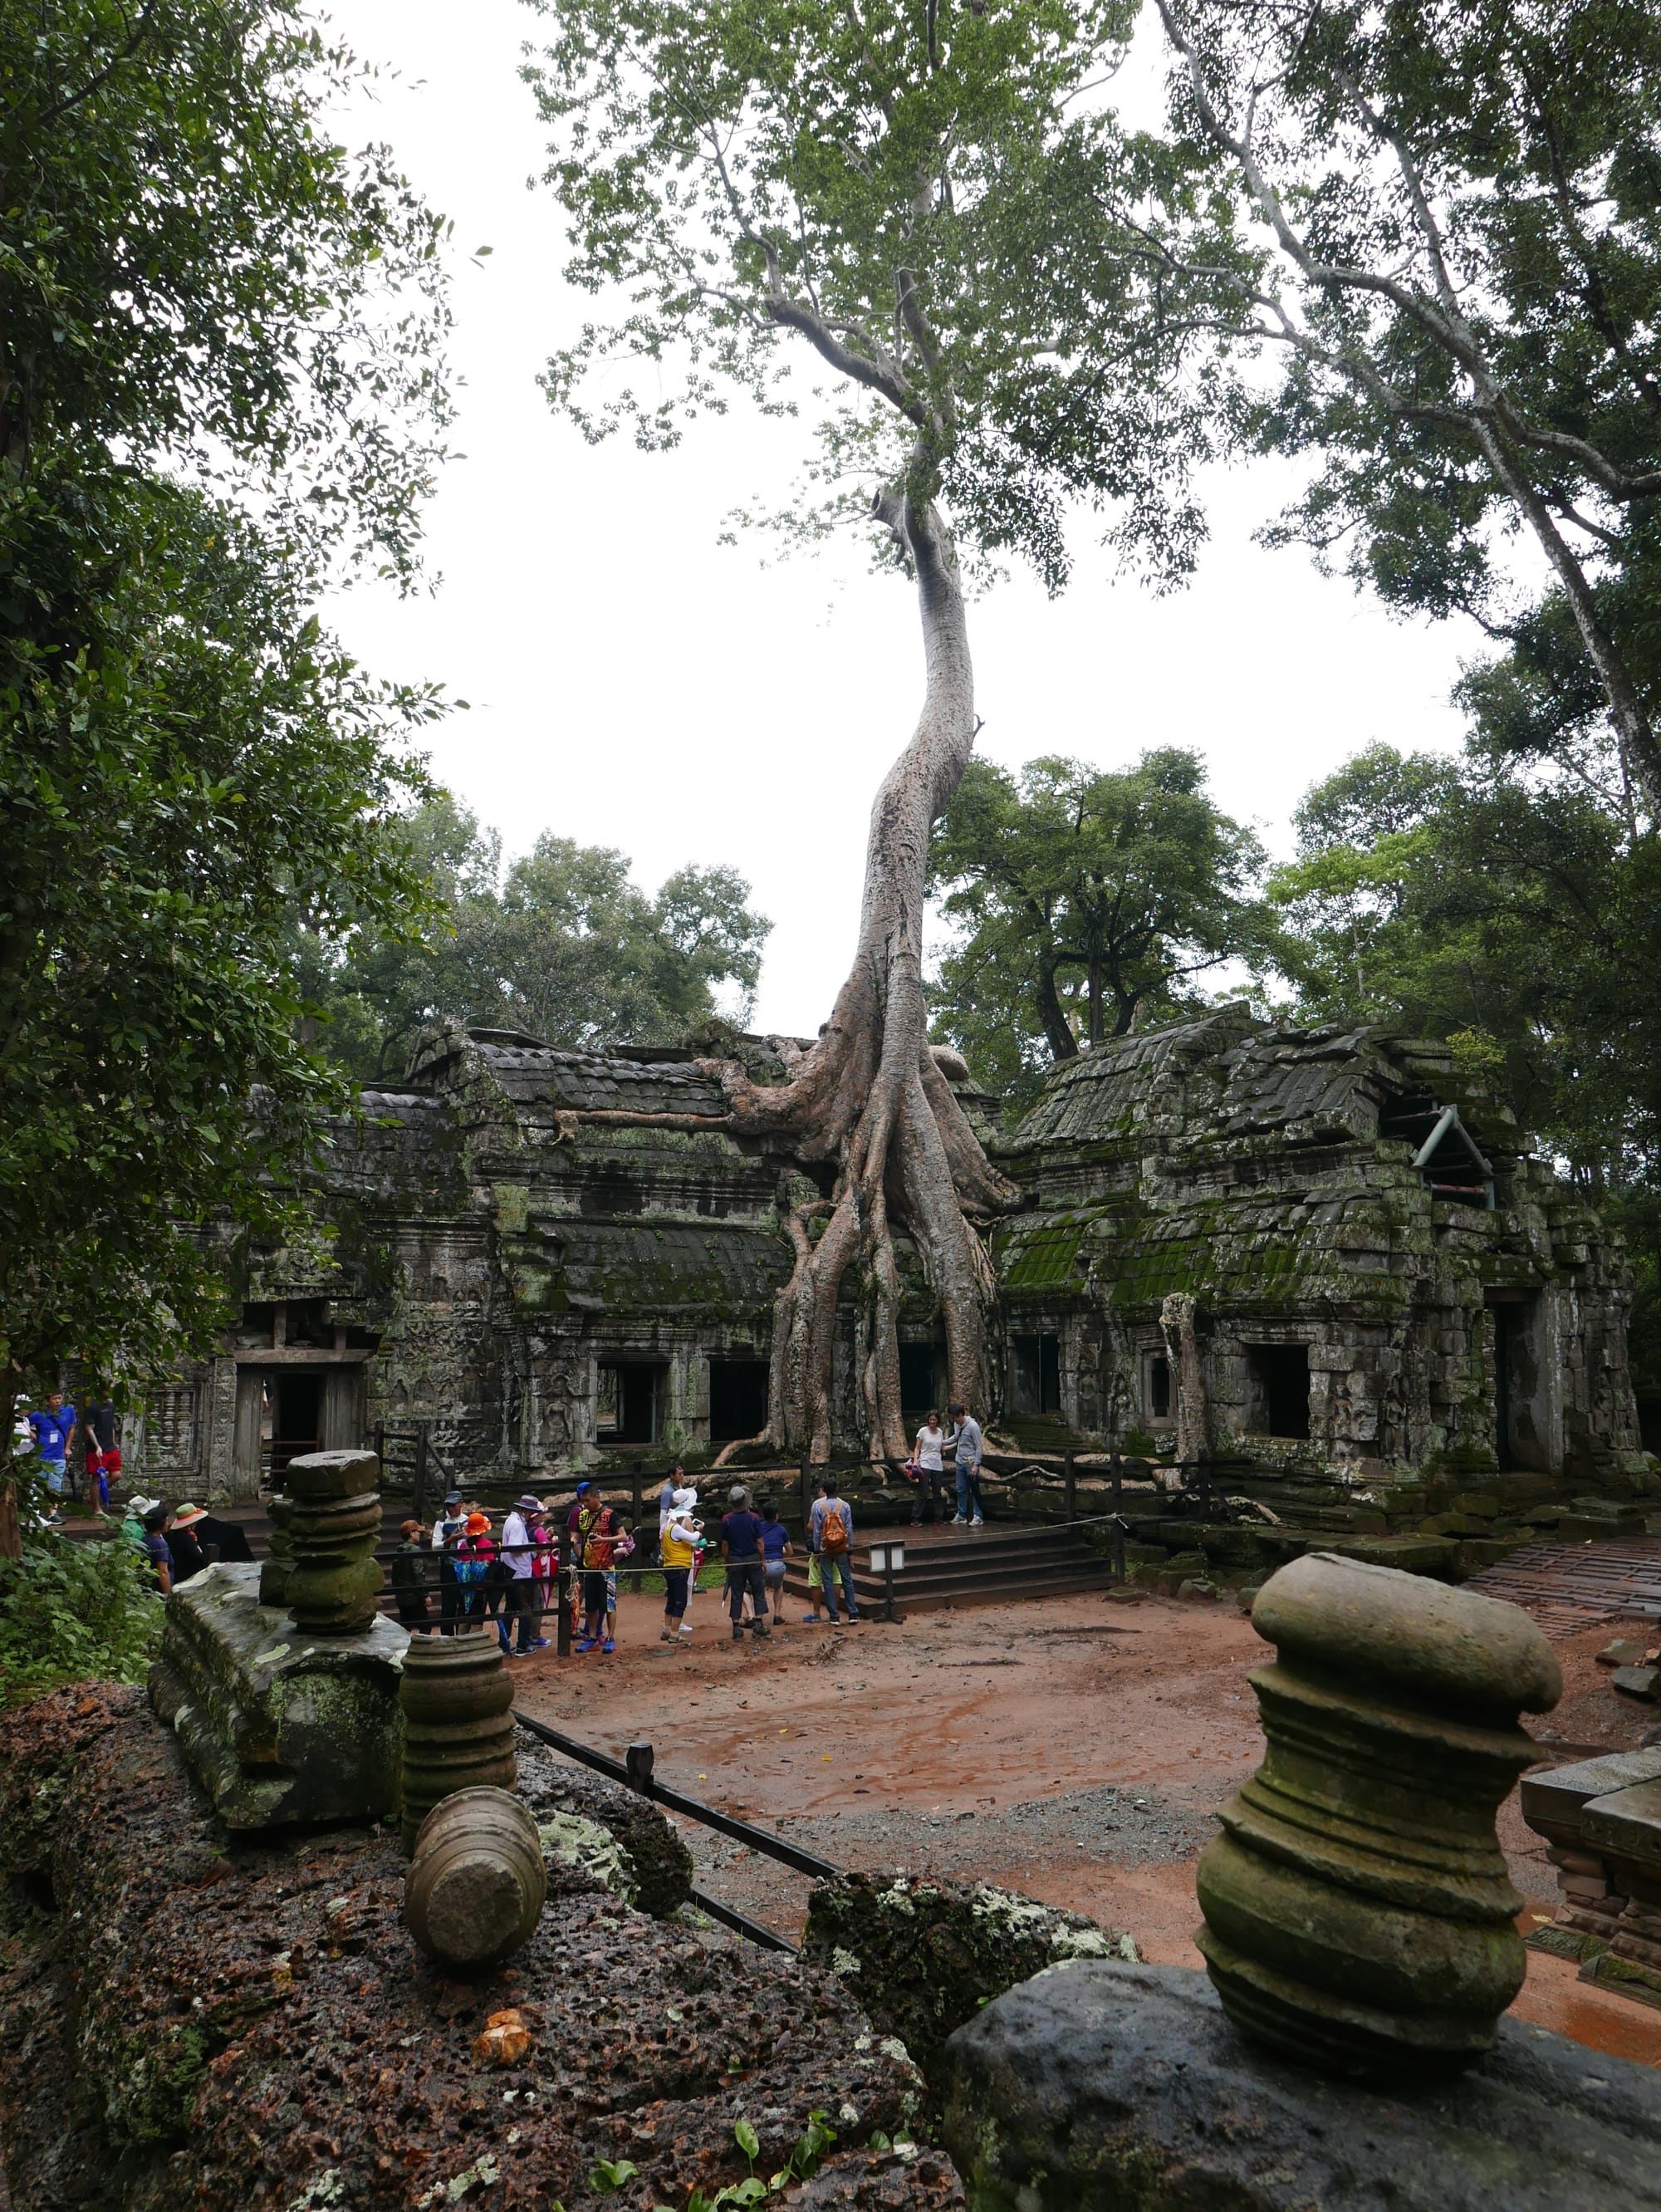 Photo by Author — how can a building survive this happening to it — Ta Prohm (ប្រាសាទតាព្រហ្ម), Angkor Archaeological Park, Angkor, Cambodia